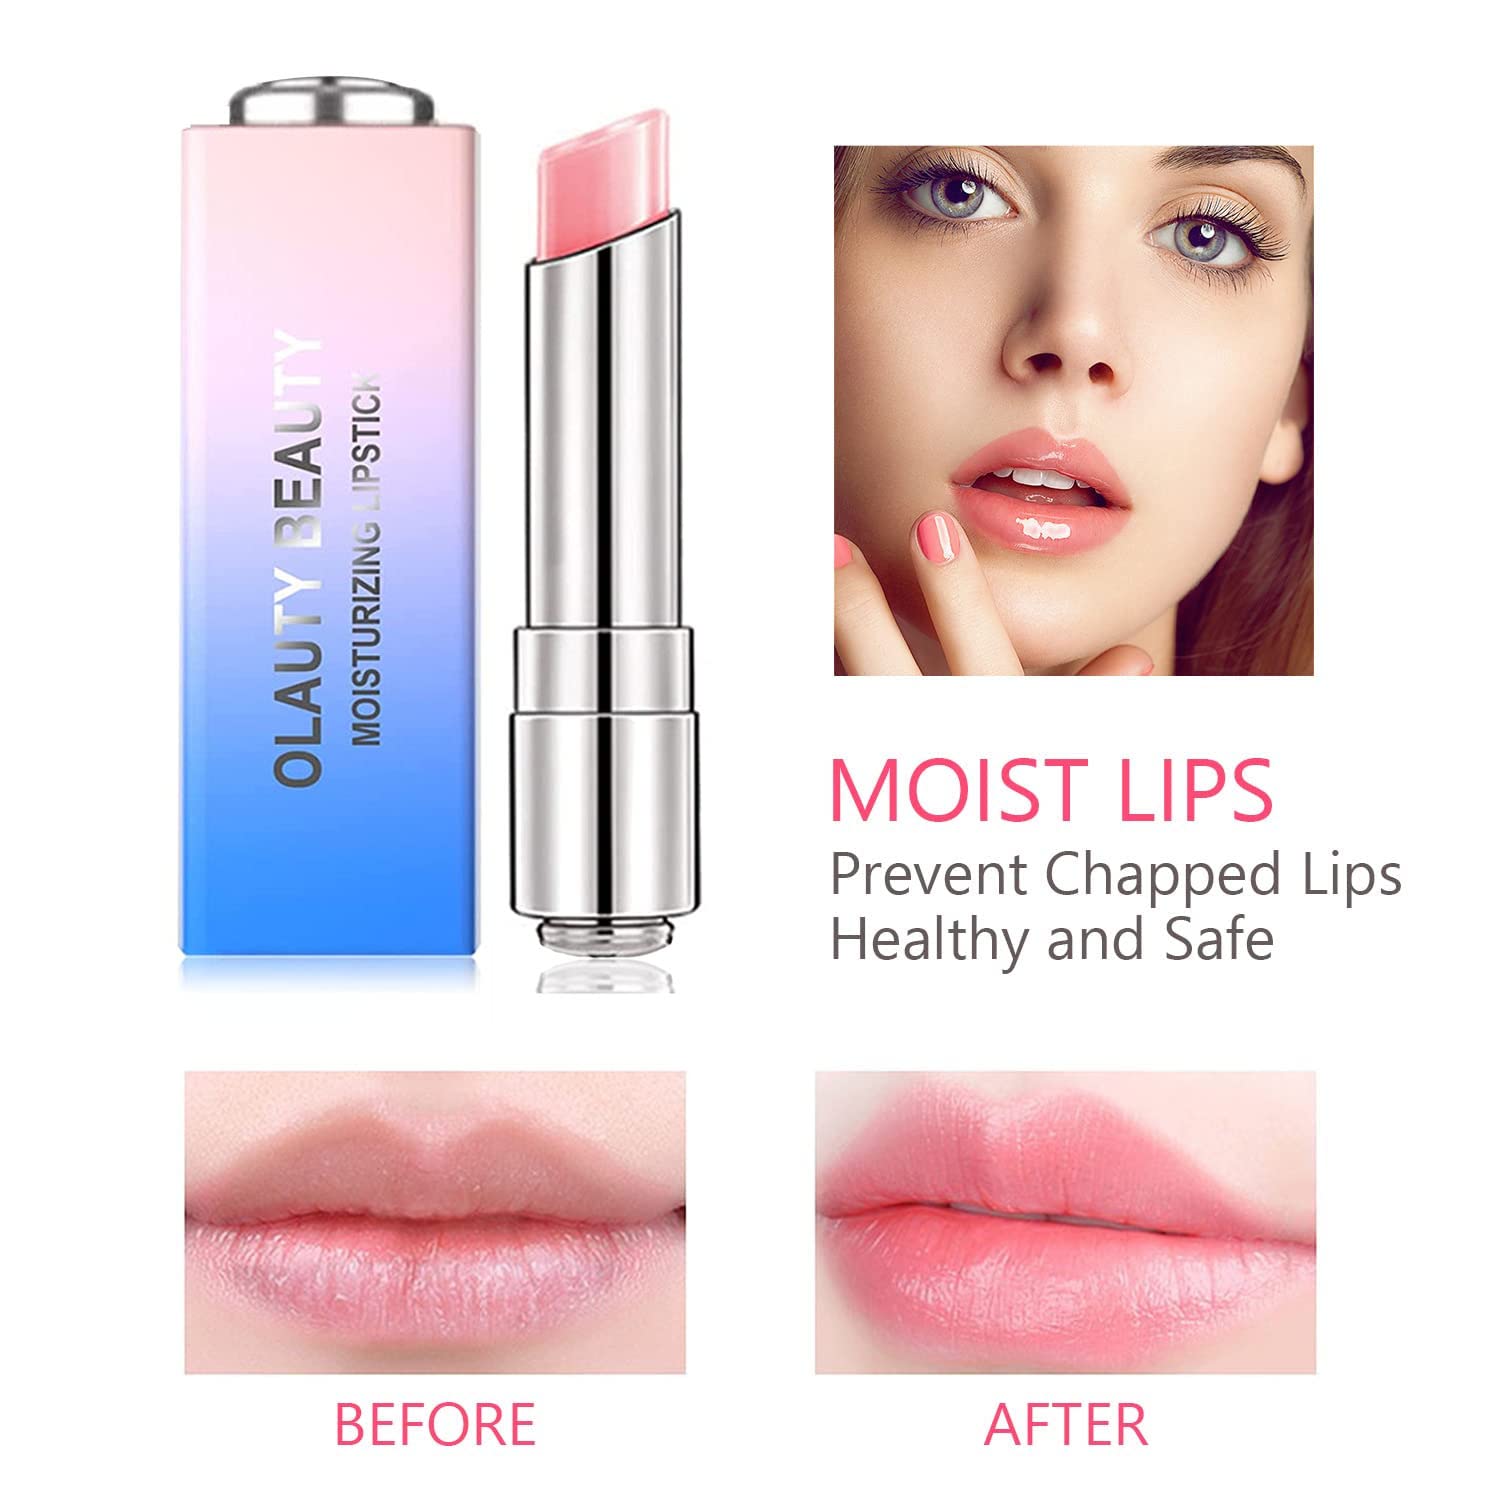 firstfly Pack of 3 Crystal Jelly Lipstick, Long Lasting Nutritious Lip Balm Lips Moisturizer Magic Temperature Color Change Lip Gloss (3 Pack)